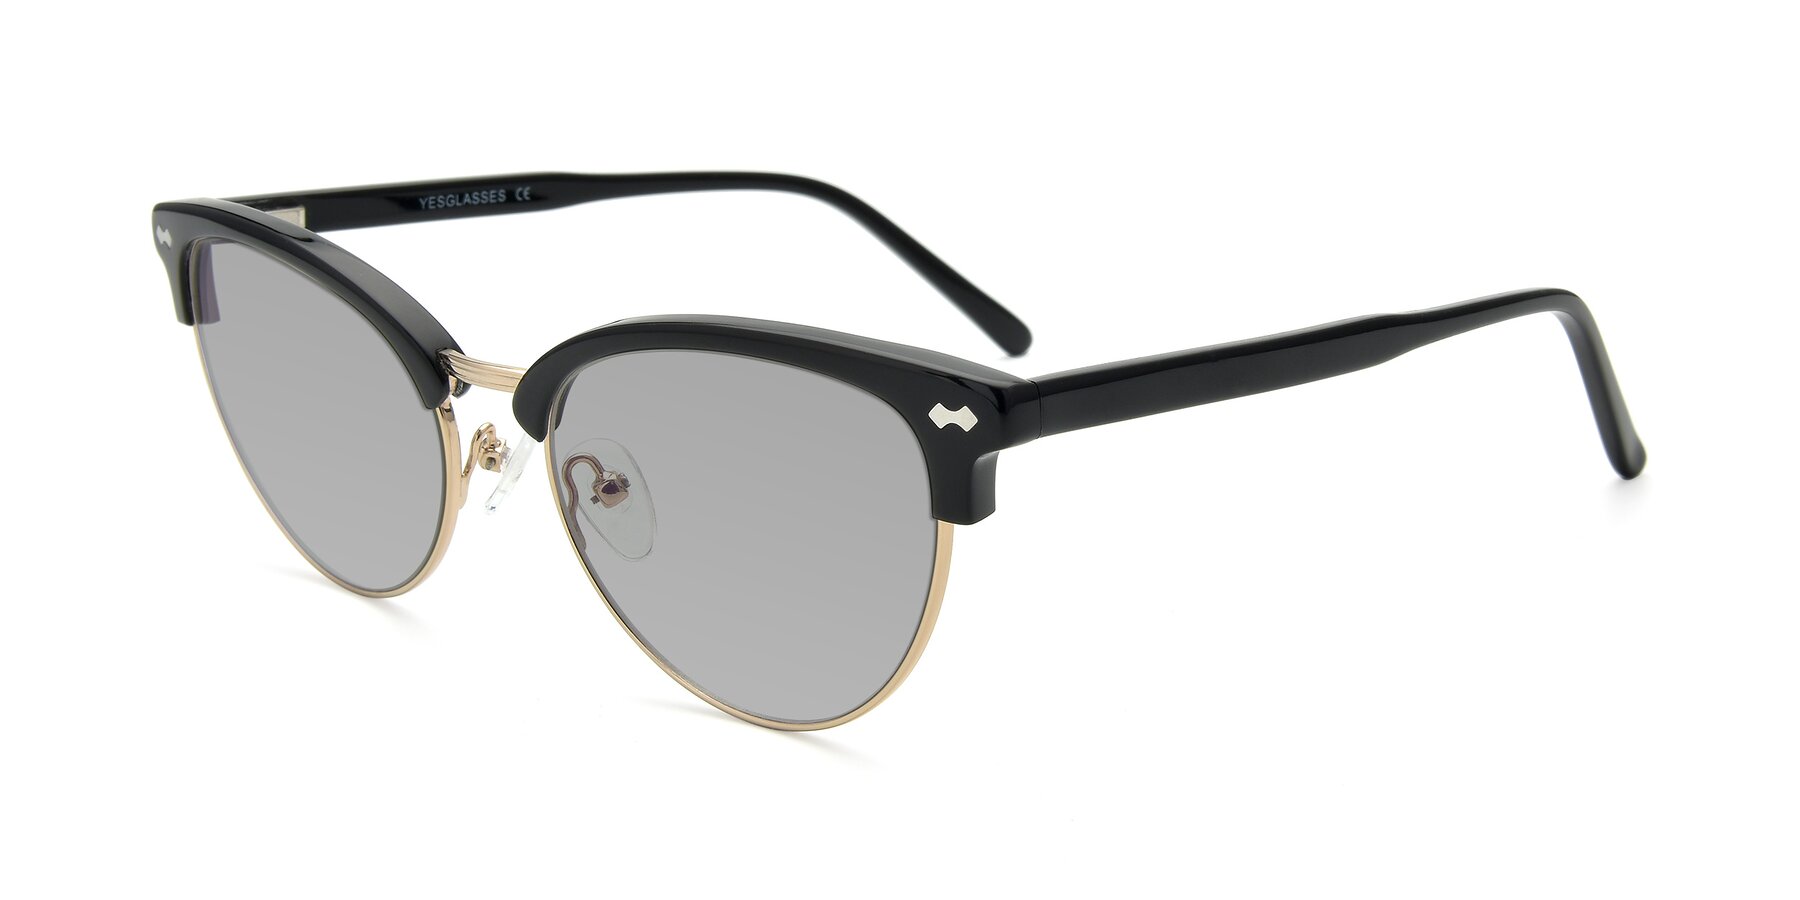 Angle of 17461 in Black-Gold with Light Gray Tinted Lenses